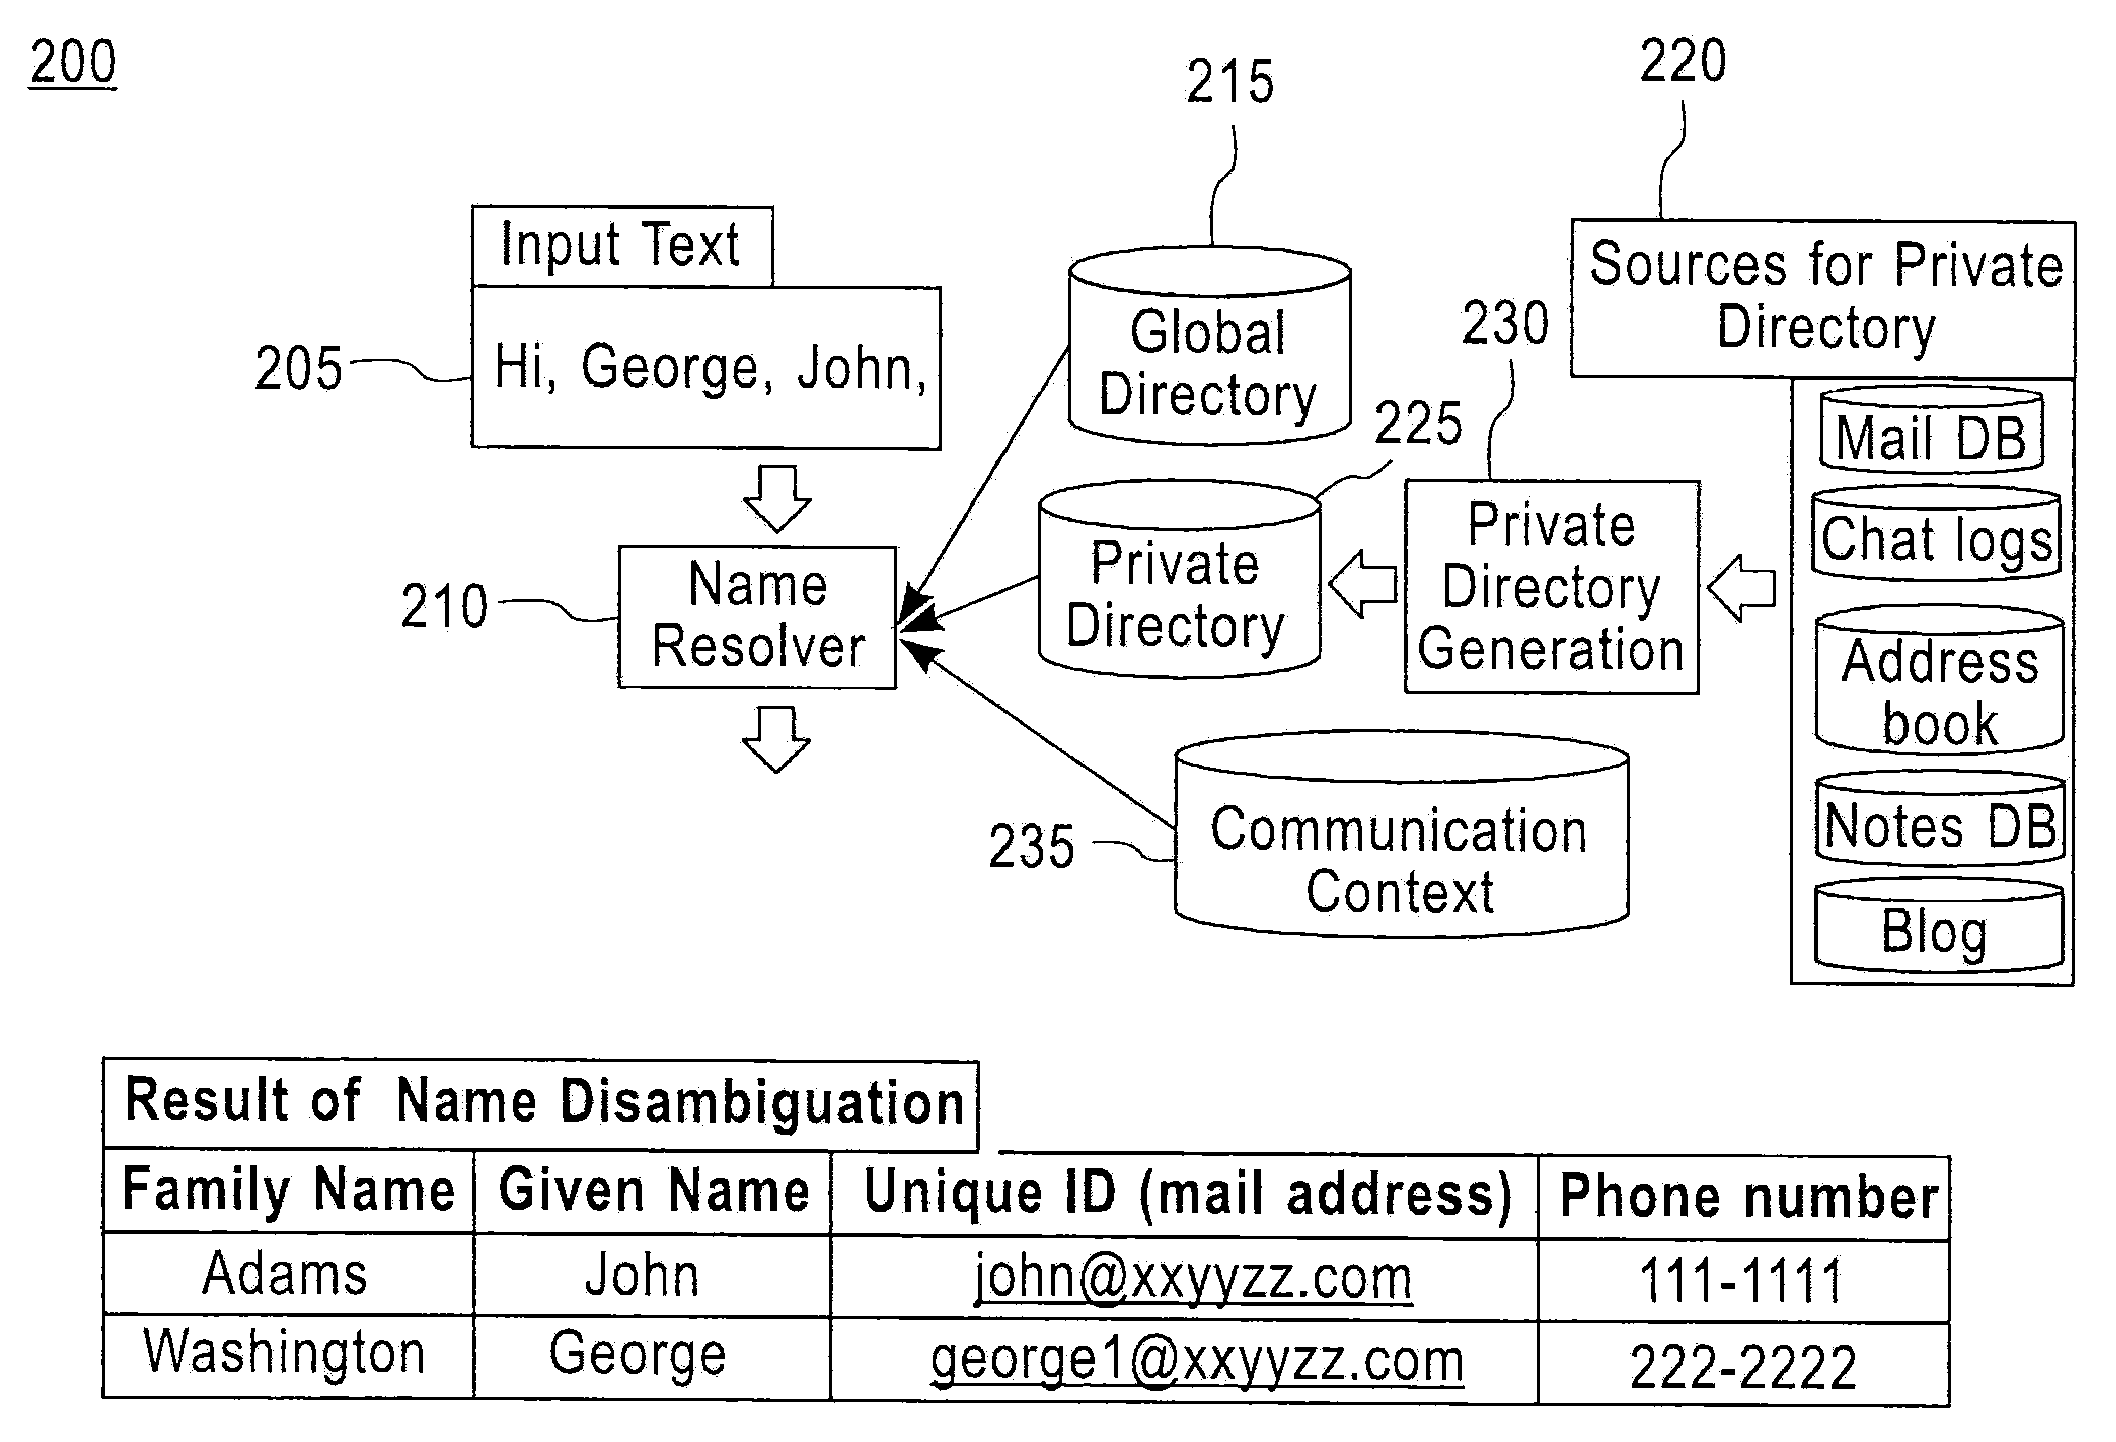 Systems, methods and computer products for name disambiguation by using private/global directories, and communication contexts